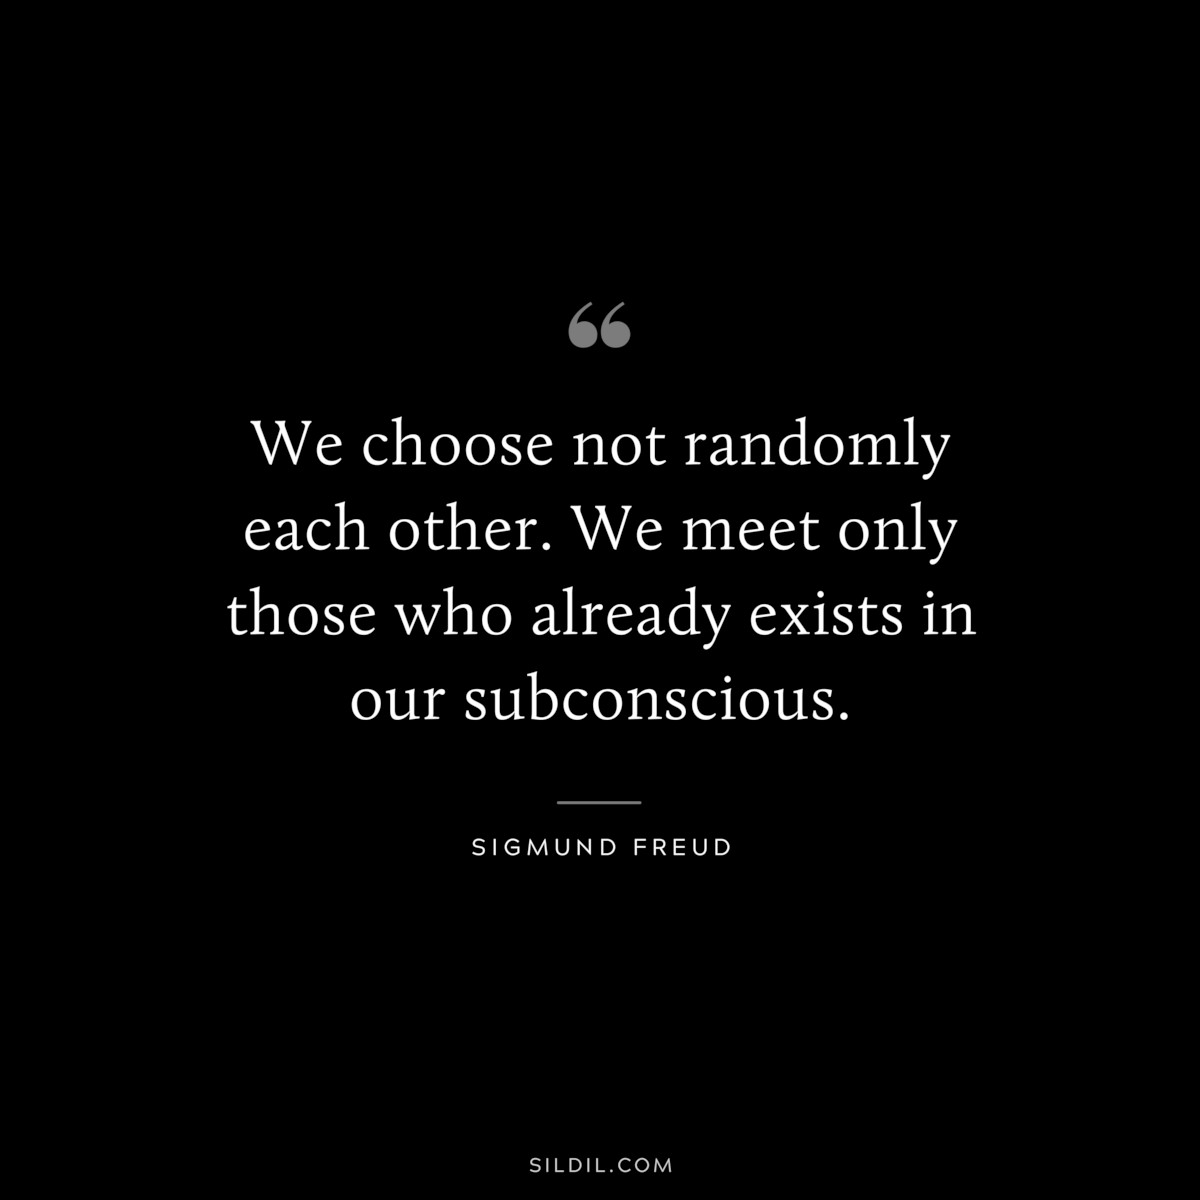 We choose not randomly each other. We meet only those who already exists in our subconscious. ― Sigmund Frued